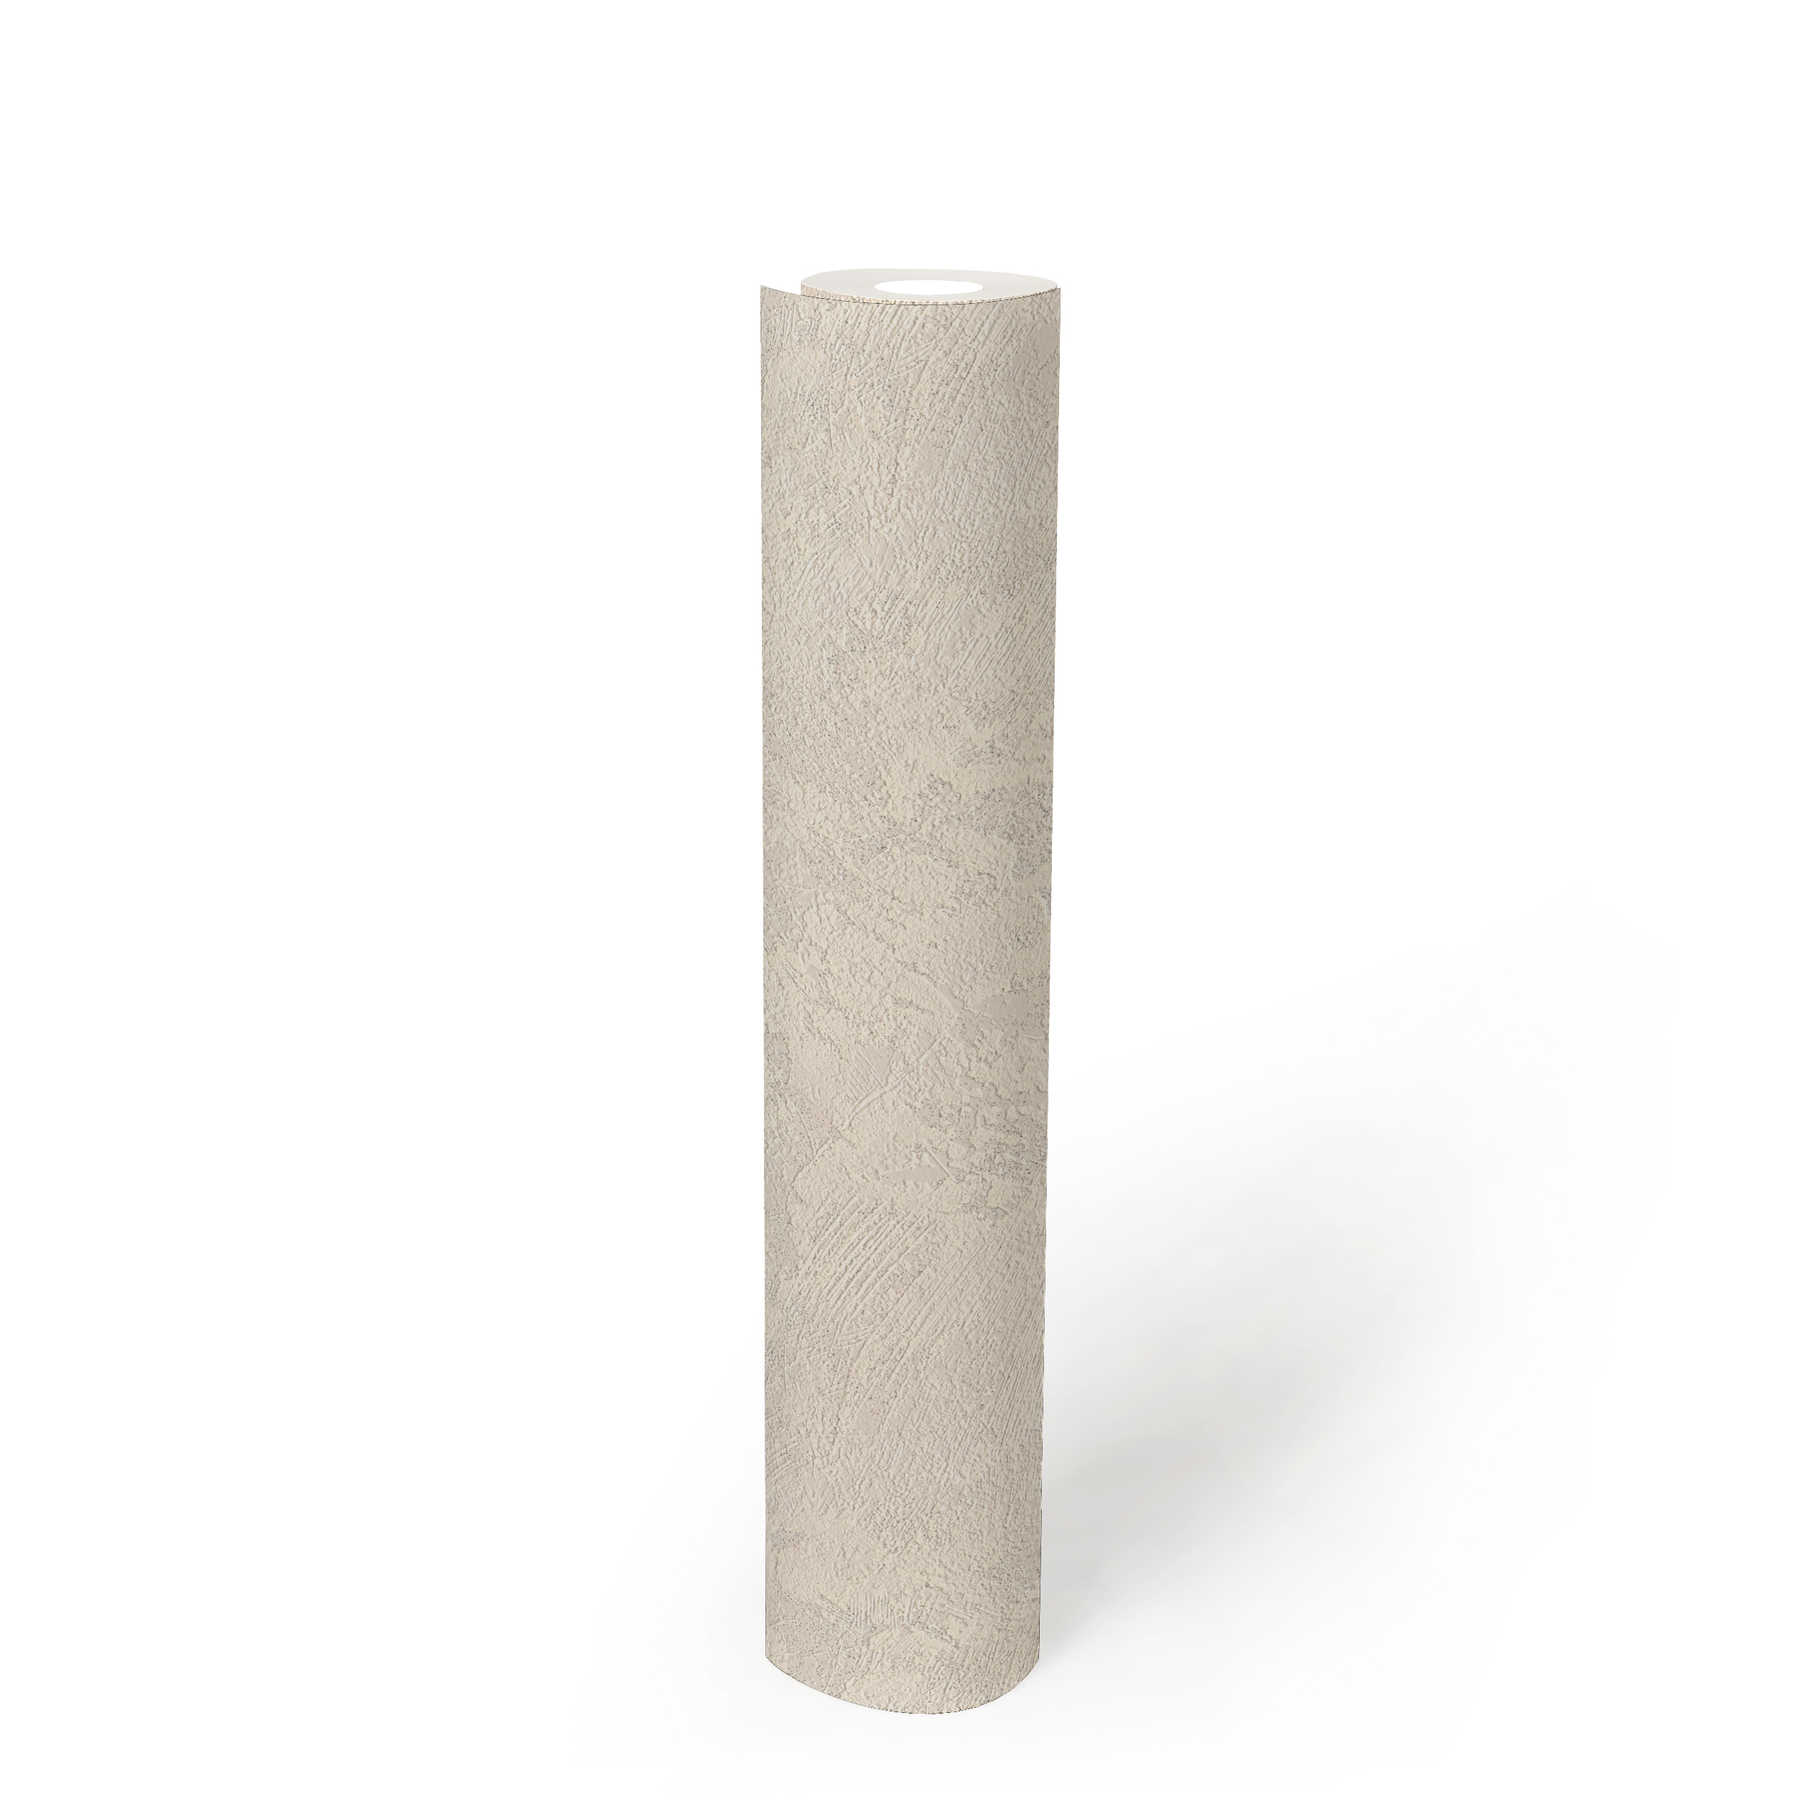             Plaster look non-woven wallpaper with rustic hatching - cream, grey
        